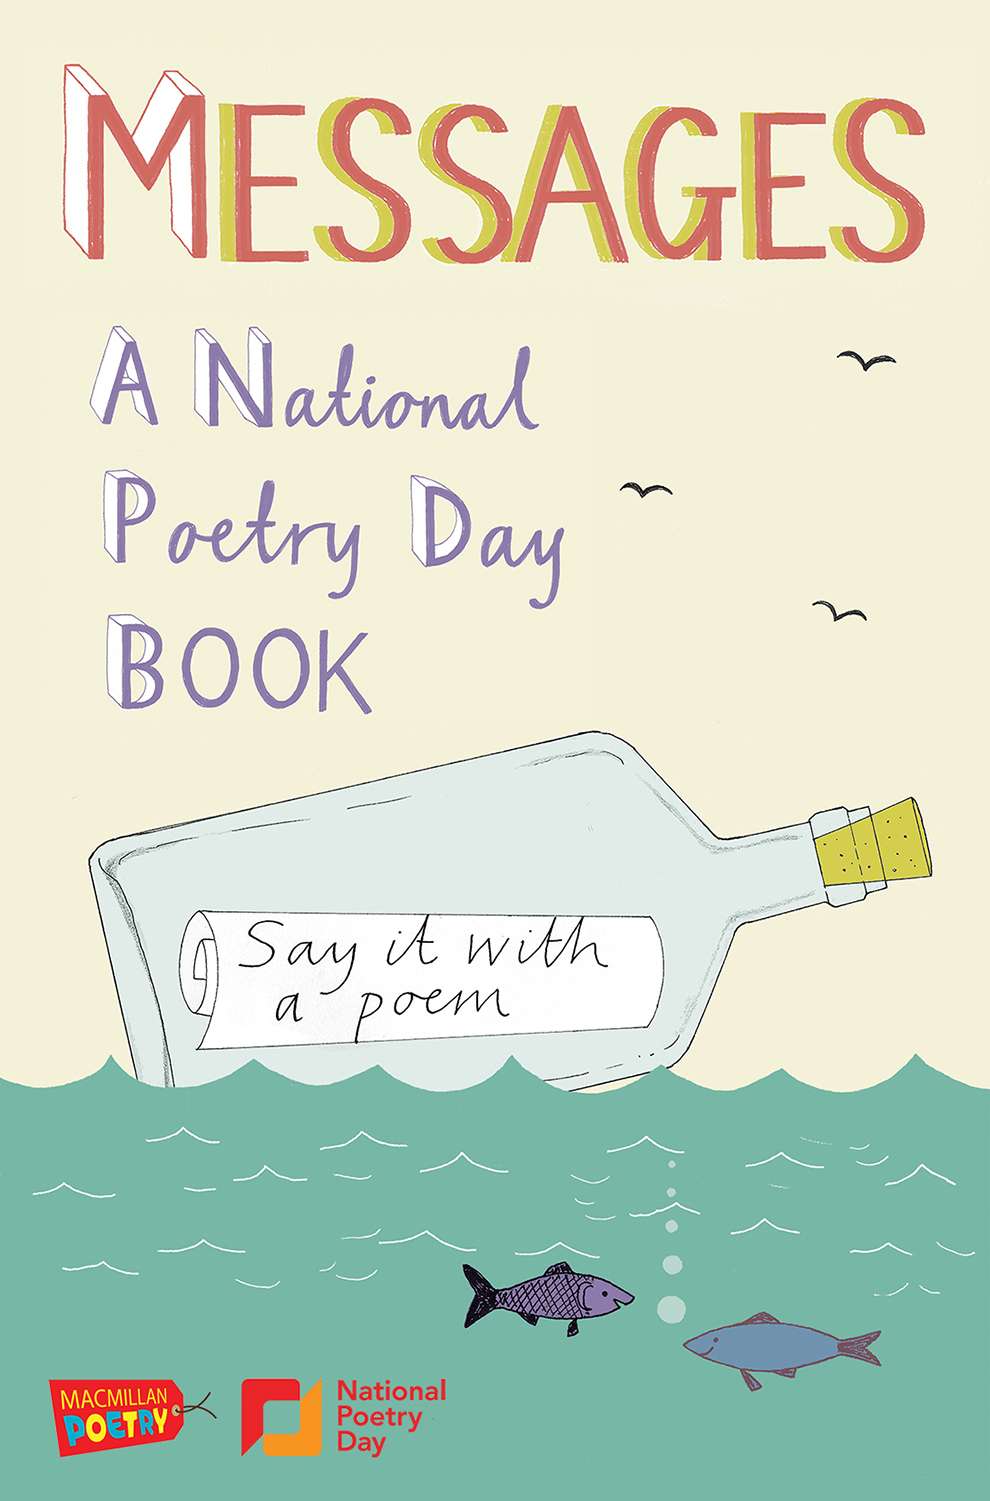 Harriet Russell, book cover for national poetry day